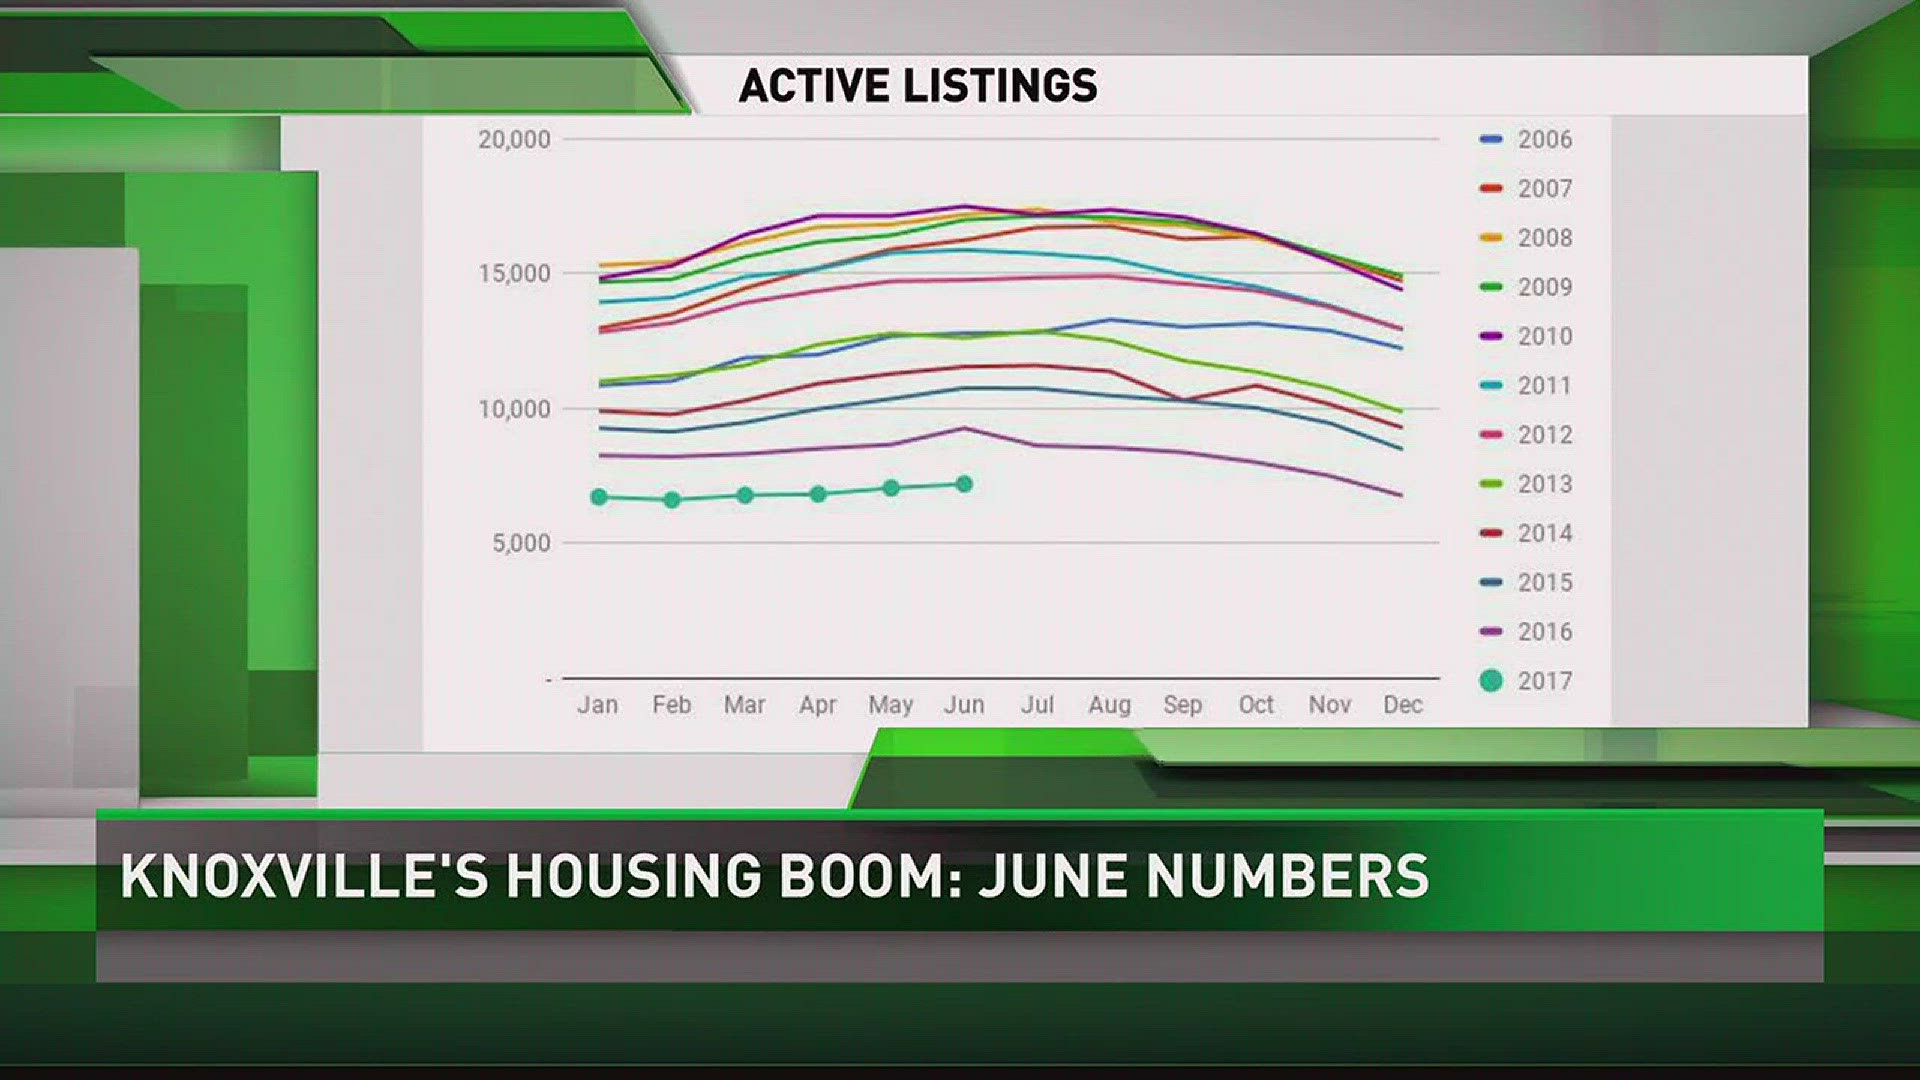 The housing market continues to tighten here in East Tennessee reaching activity levels we haven't seen in years.